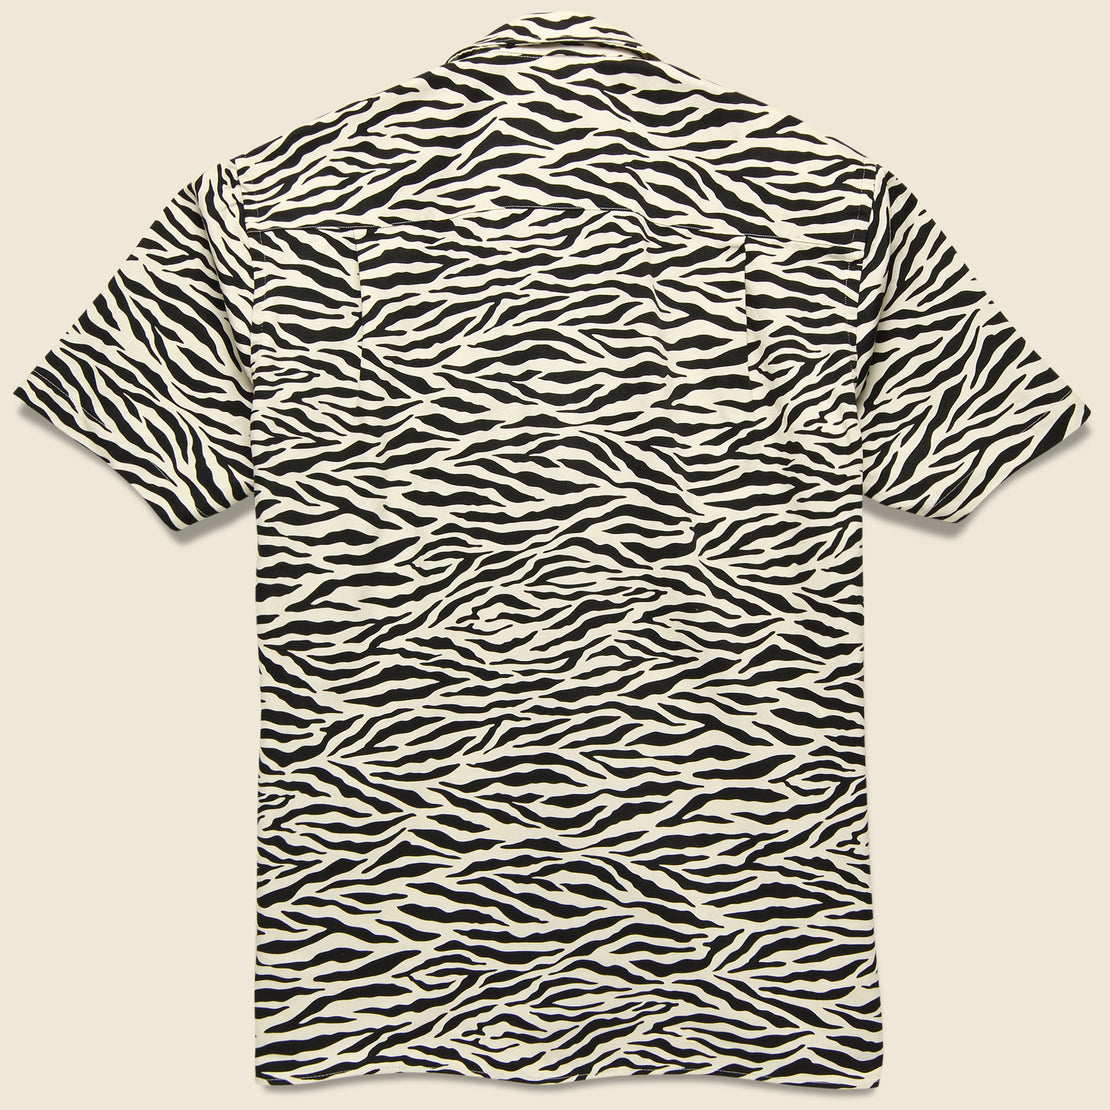 Camp Collar Zebra Print Shirt - Black/White - Gitman Vintage - STAG Provisions - Tops - S/S Woven - Other Pattern